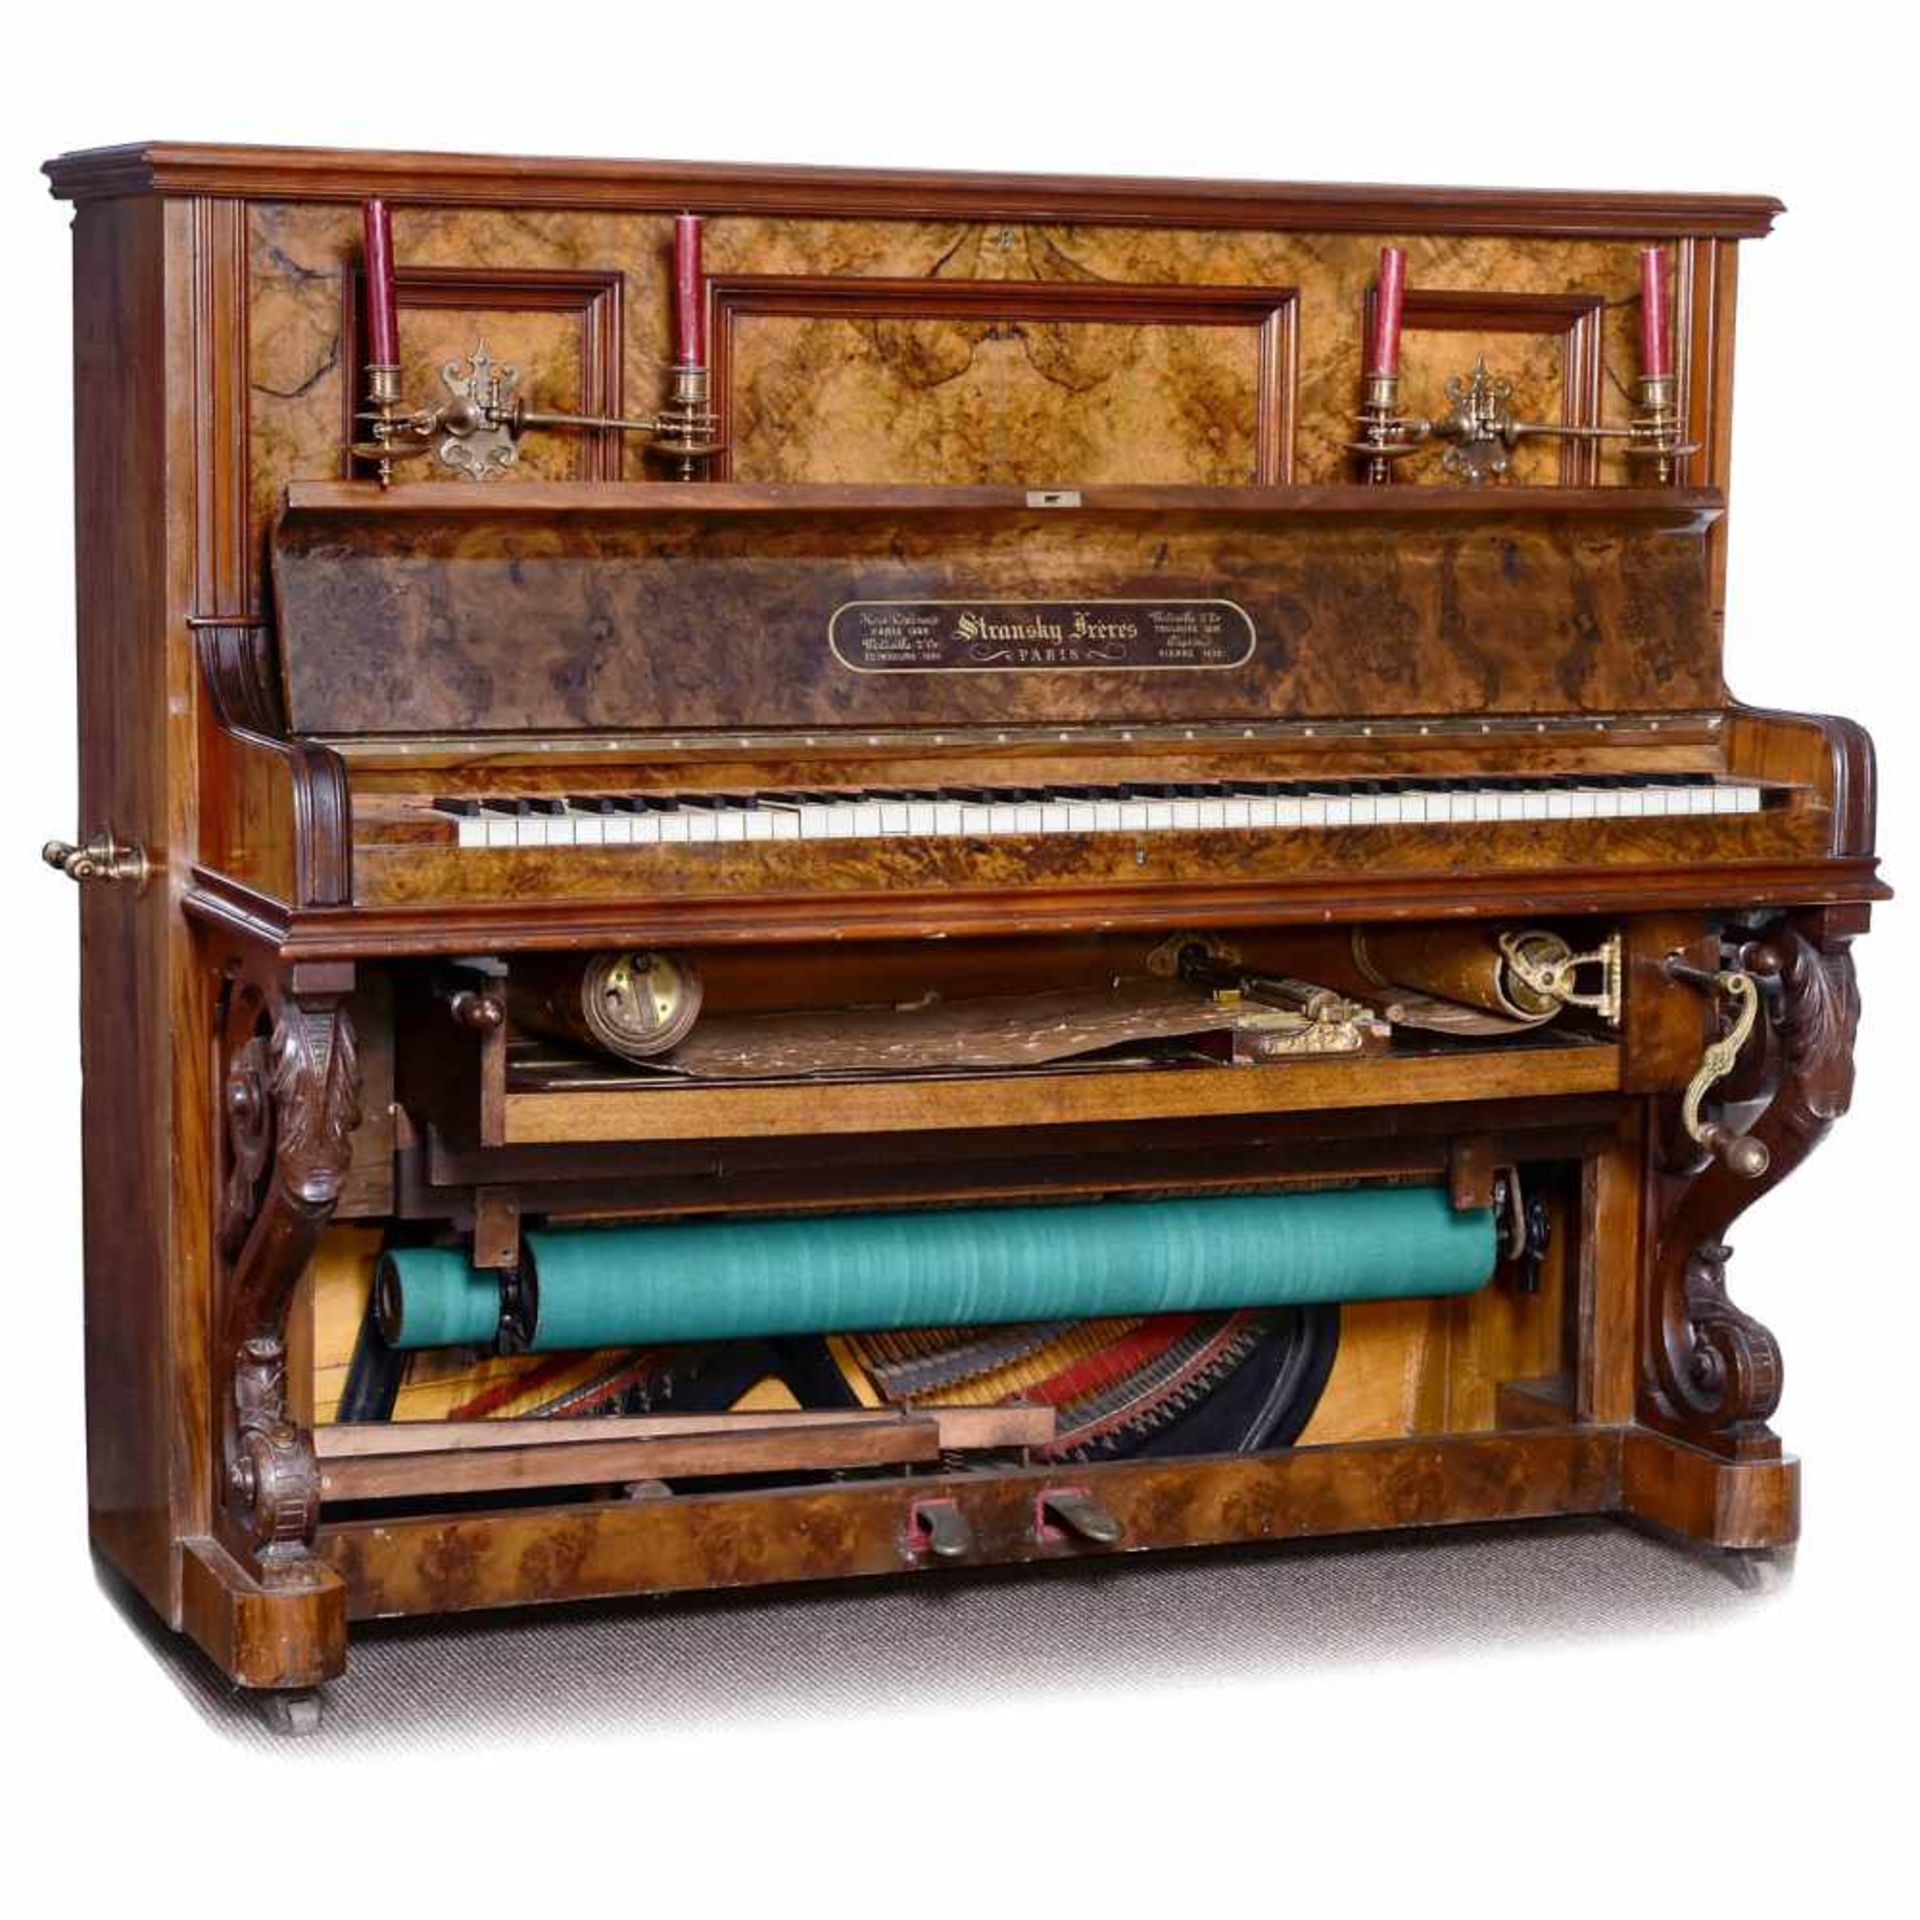 Stransky Frères Paris, Piano with System Hupfeld Piano Player, c. 1898Mechanical player piano, 61